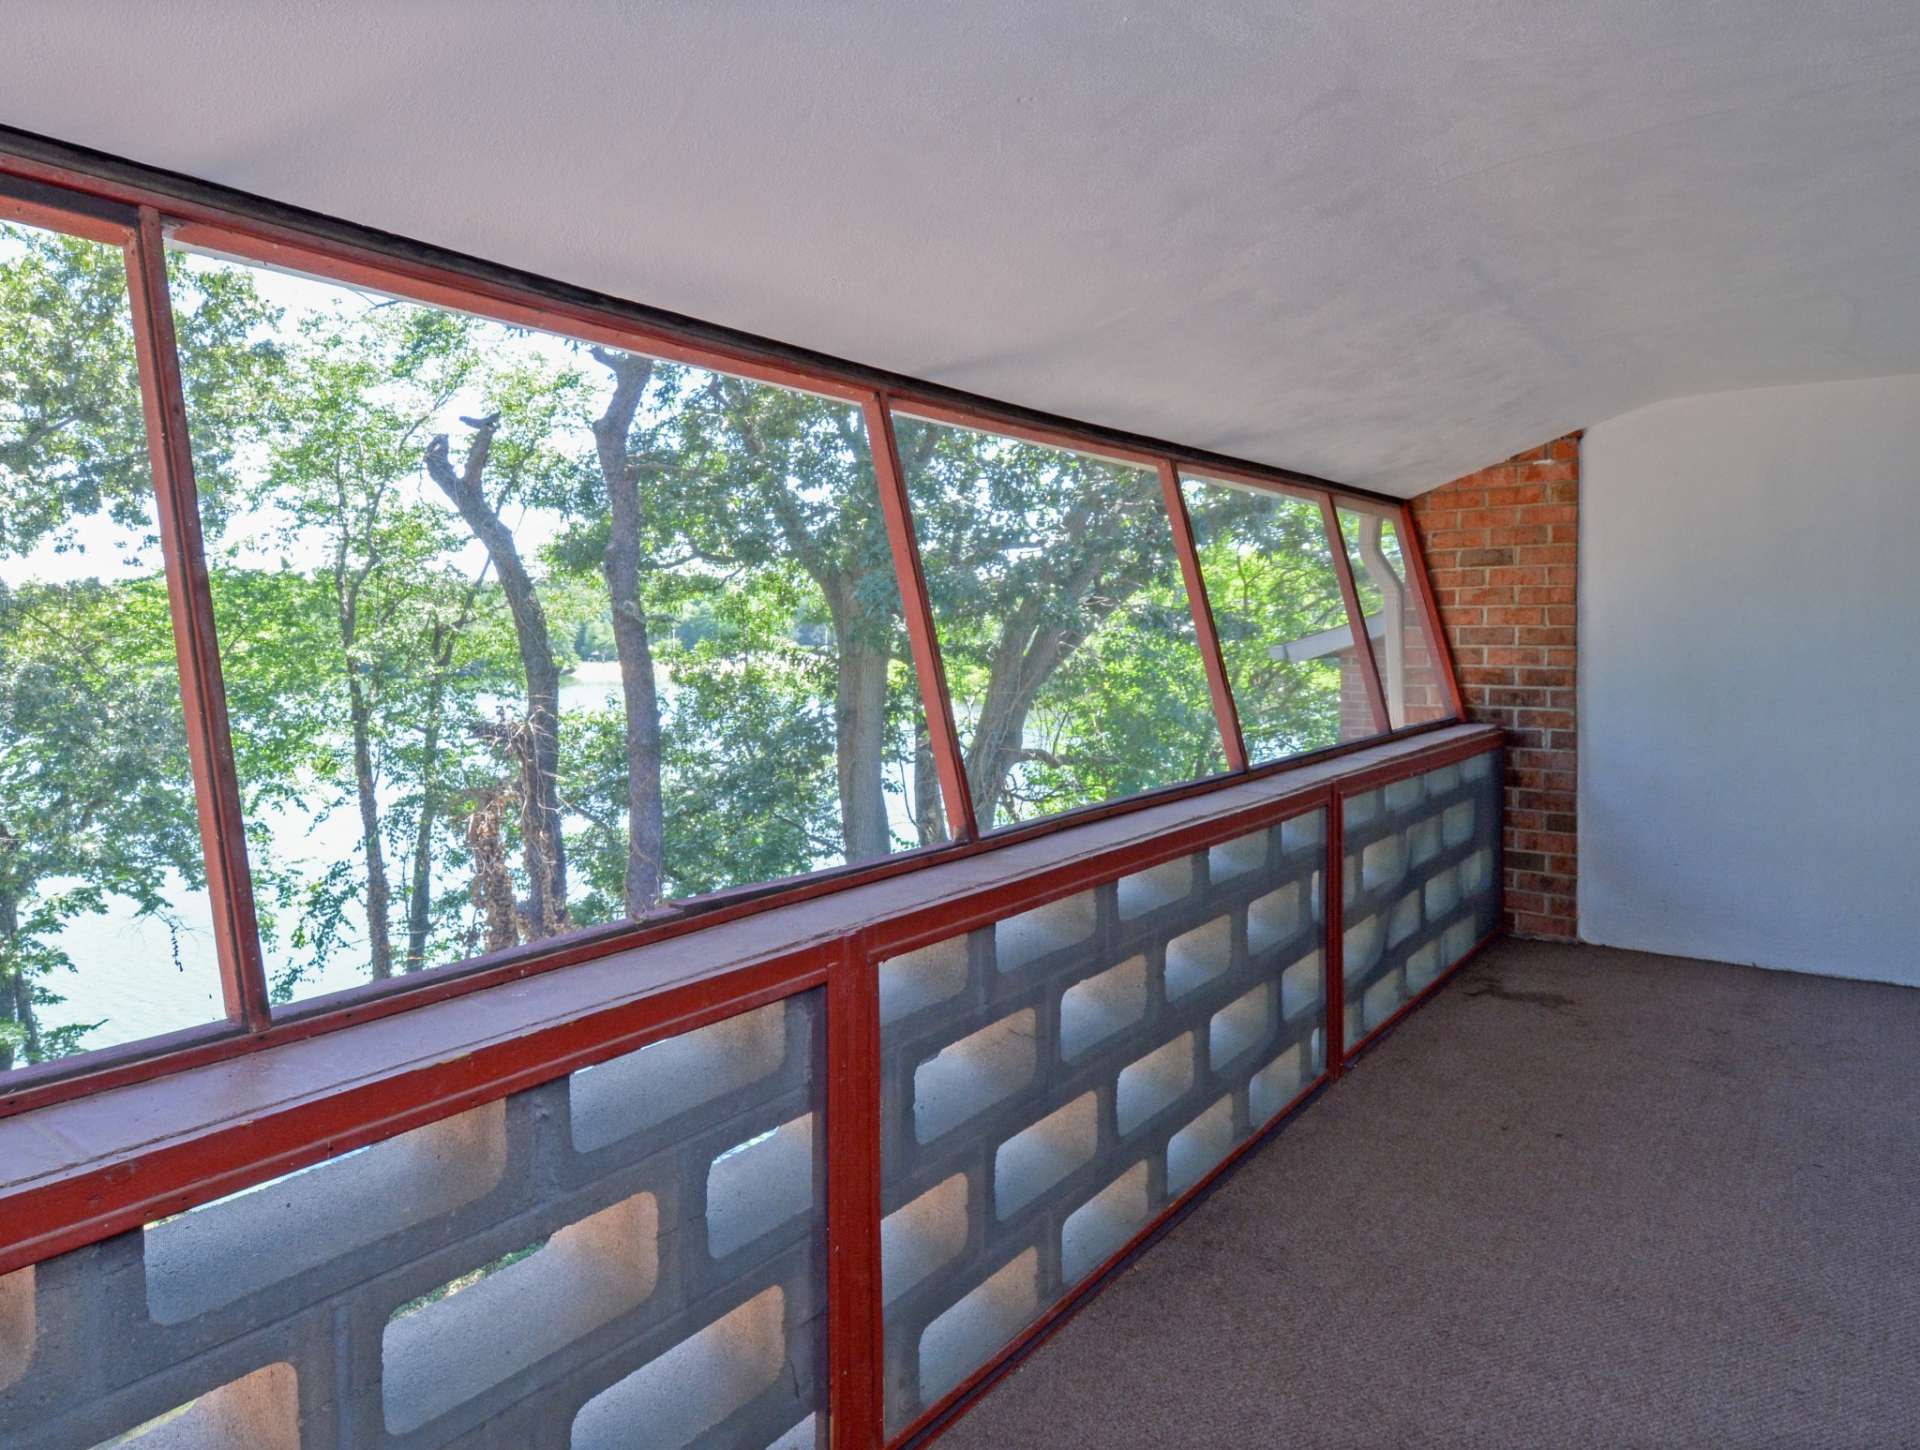 Balcony-style space with views of the lake at Lake Club Apartments.